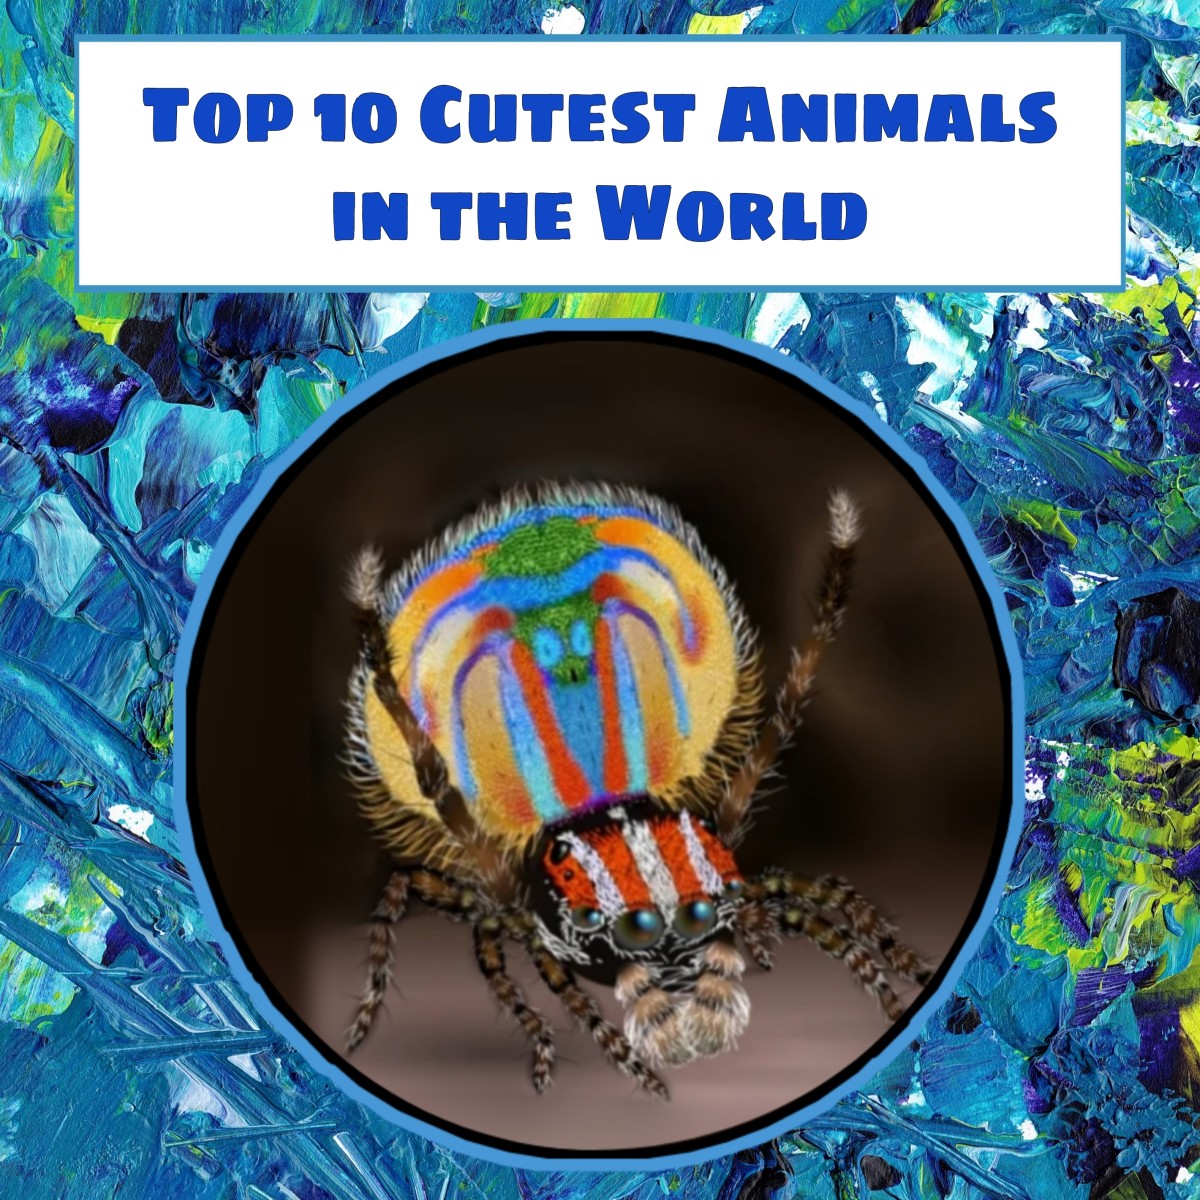 Learn about the cutest and most adorable animals in the world.